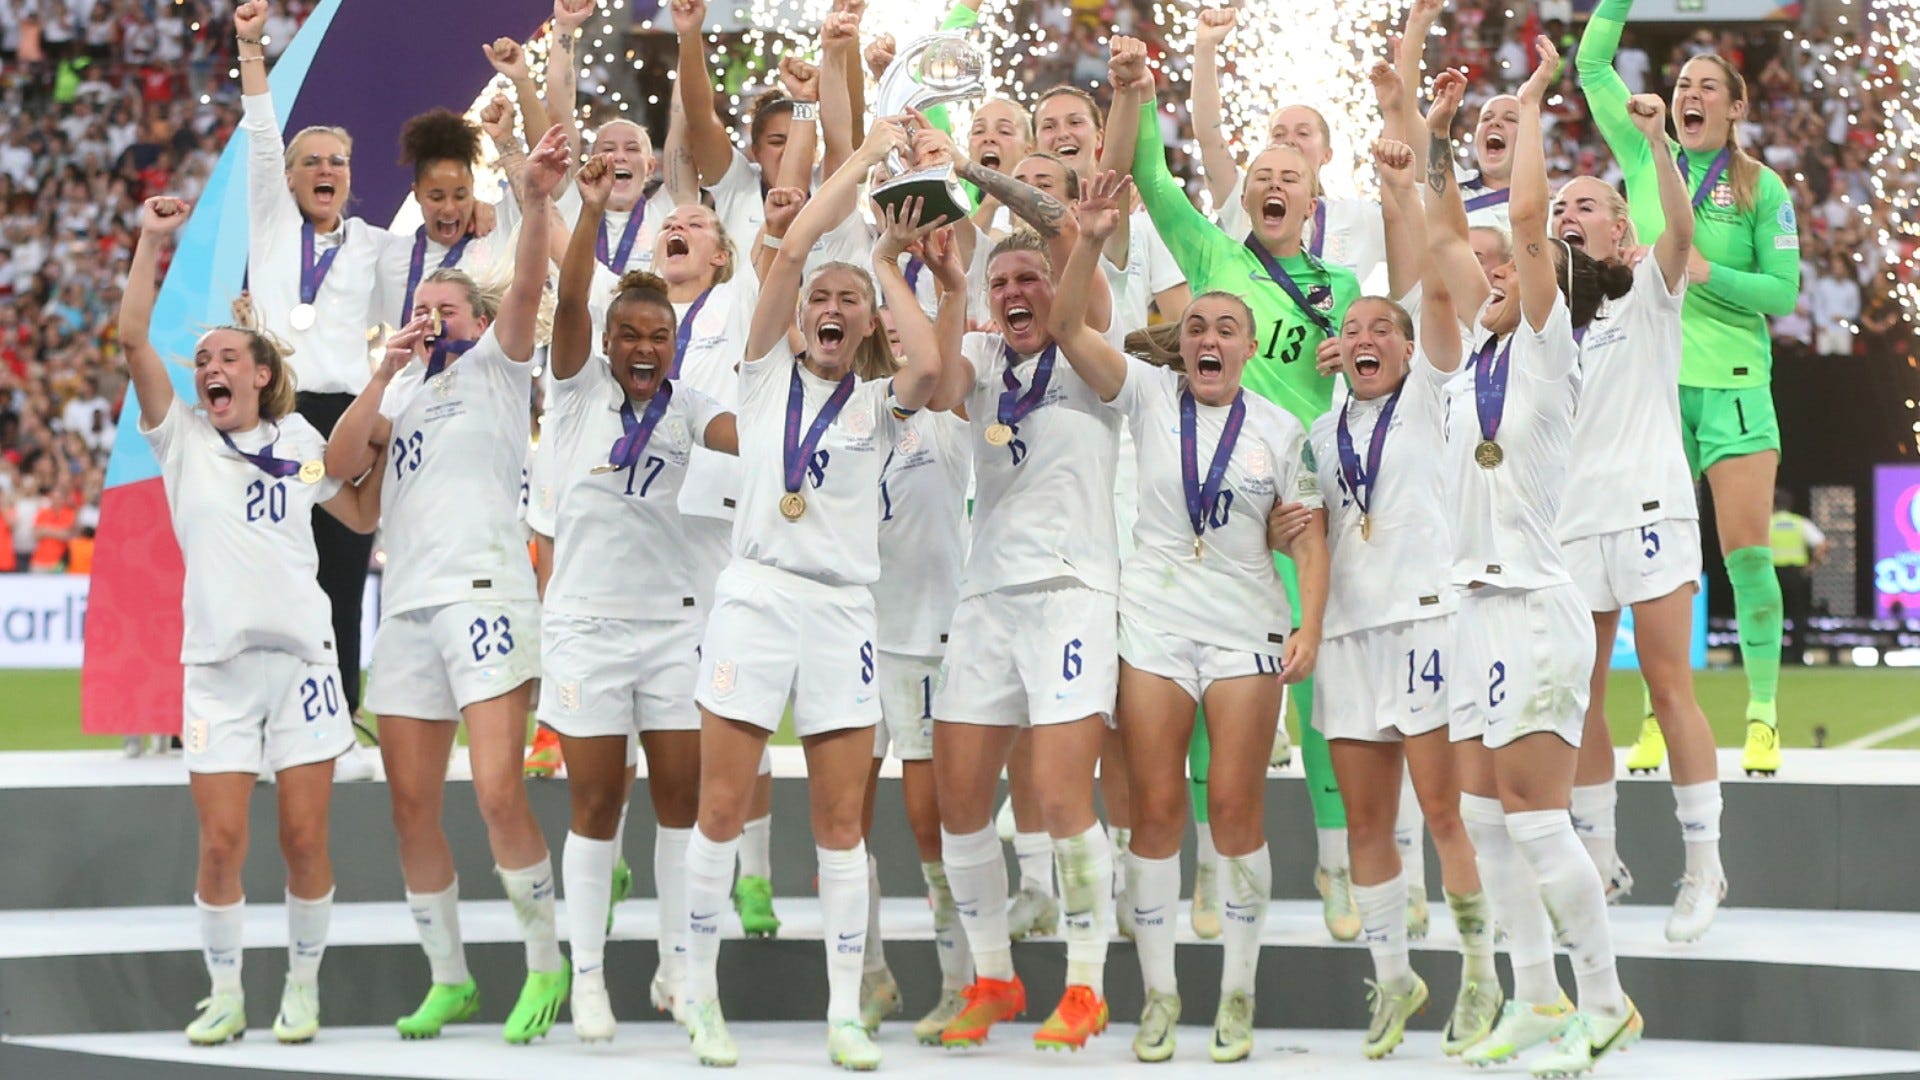 England Women's 2022 fixtures & results: World Cup qualifying group, Euros & Lionesses' match schedule in full | Goal.com